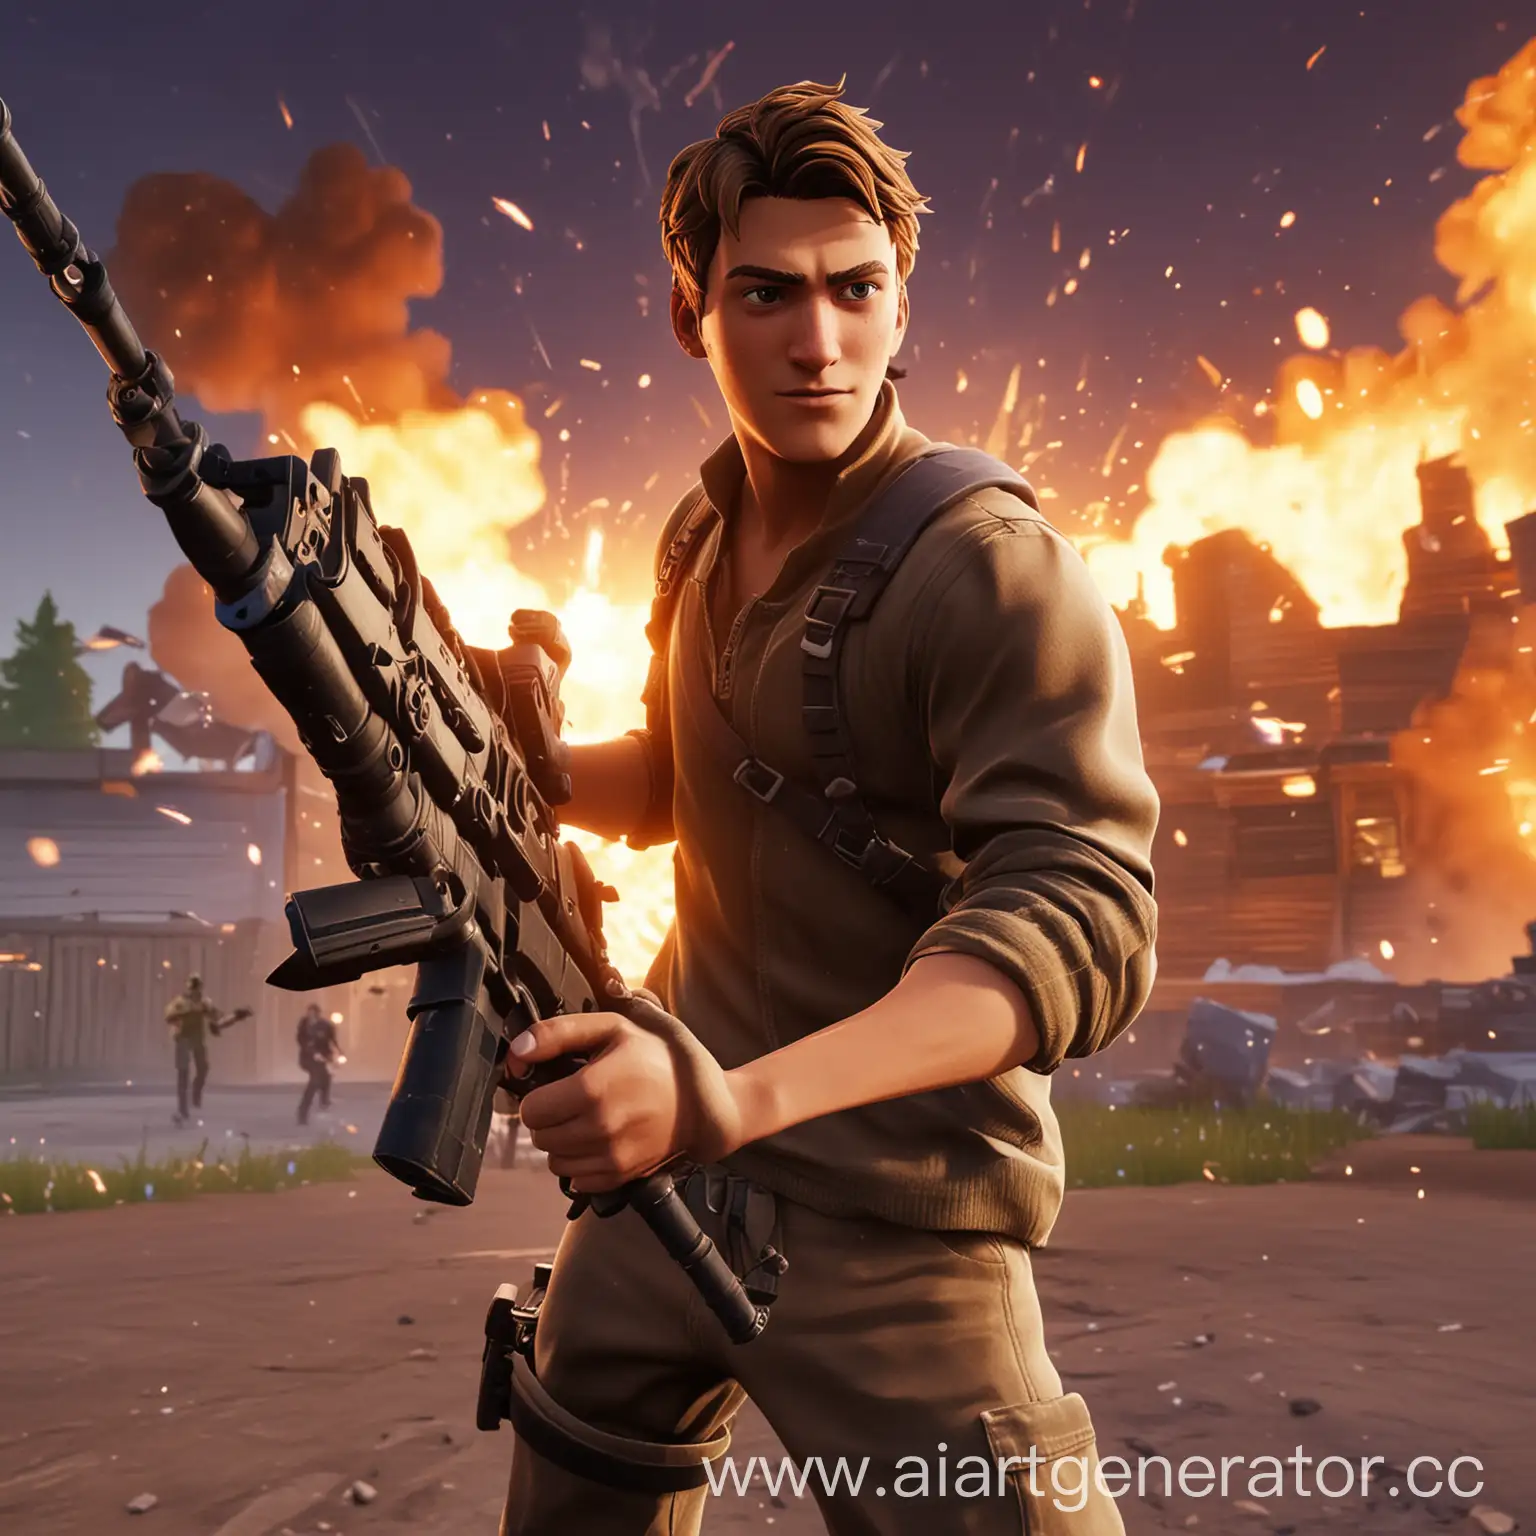 Intense-Fortnite-Warrior-with-Weapon-Amid-Explosive-Action